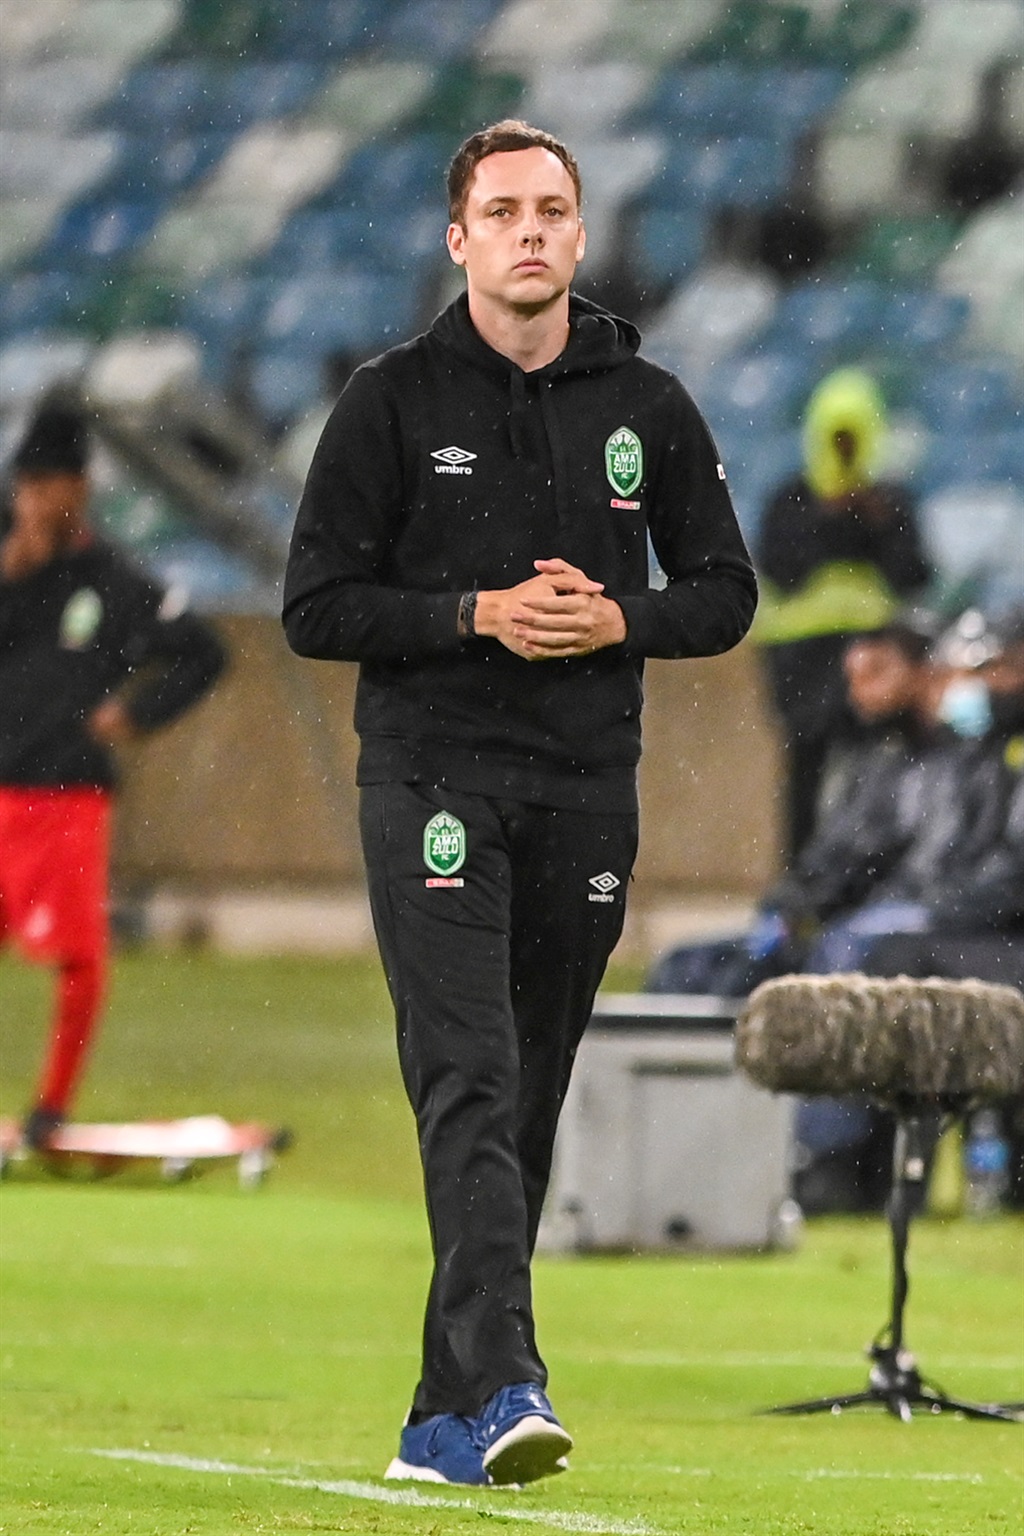 DURBAN, SOUTH AFRICA - FEBRUARY 18: Romain Folz, head coach of AmaZulu FC during the DStv Premiership match between AmaZulu FC and TS Galaxy at Moses Mabhida Stadium on February 18, 2023 in Durban, South Africa. (Photo by Darren Stewart/Gallo Images),O-5??6õ